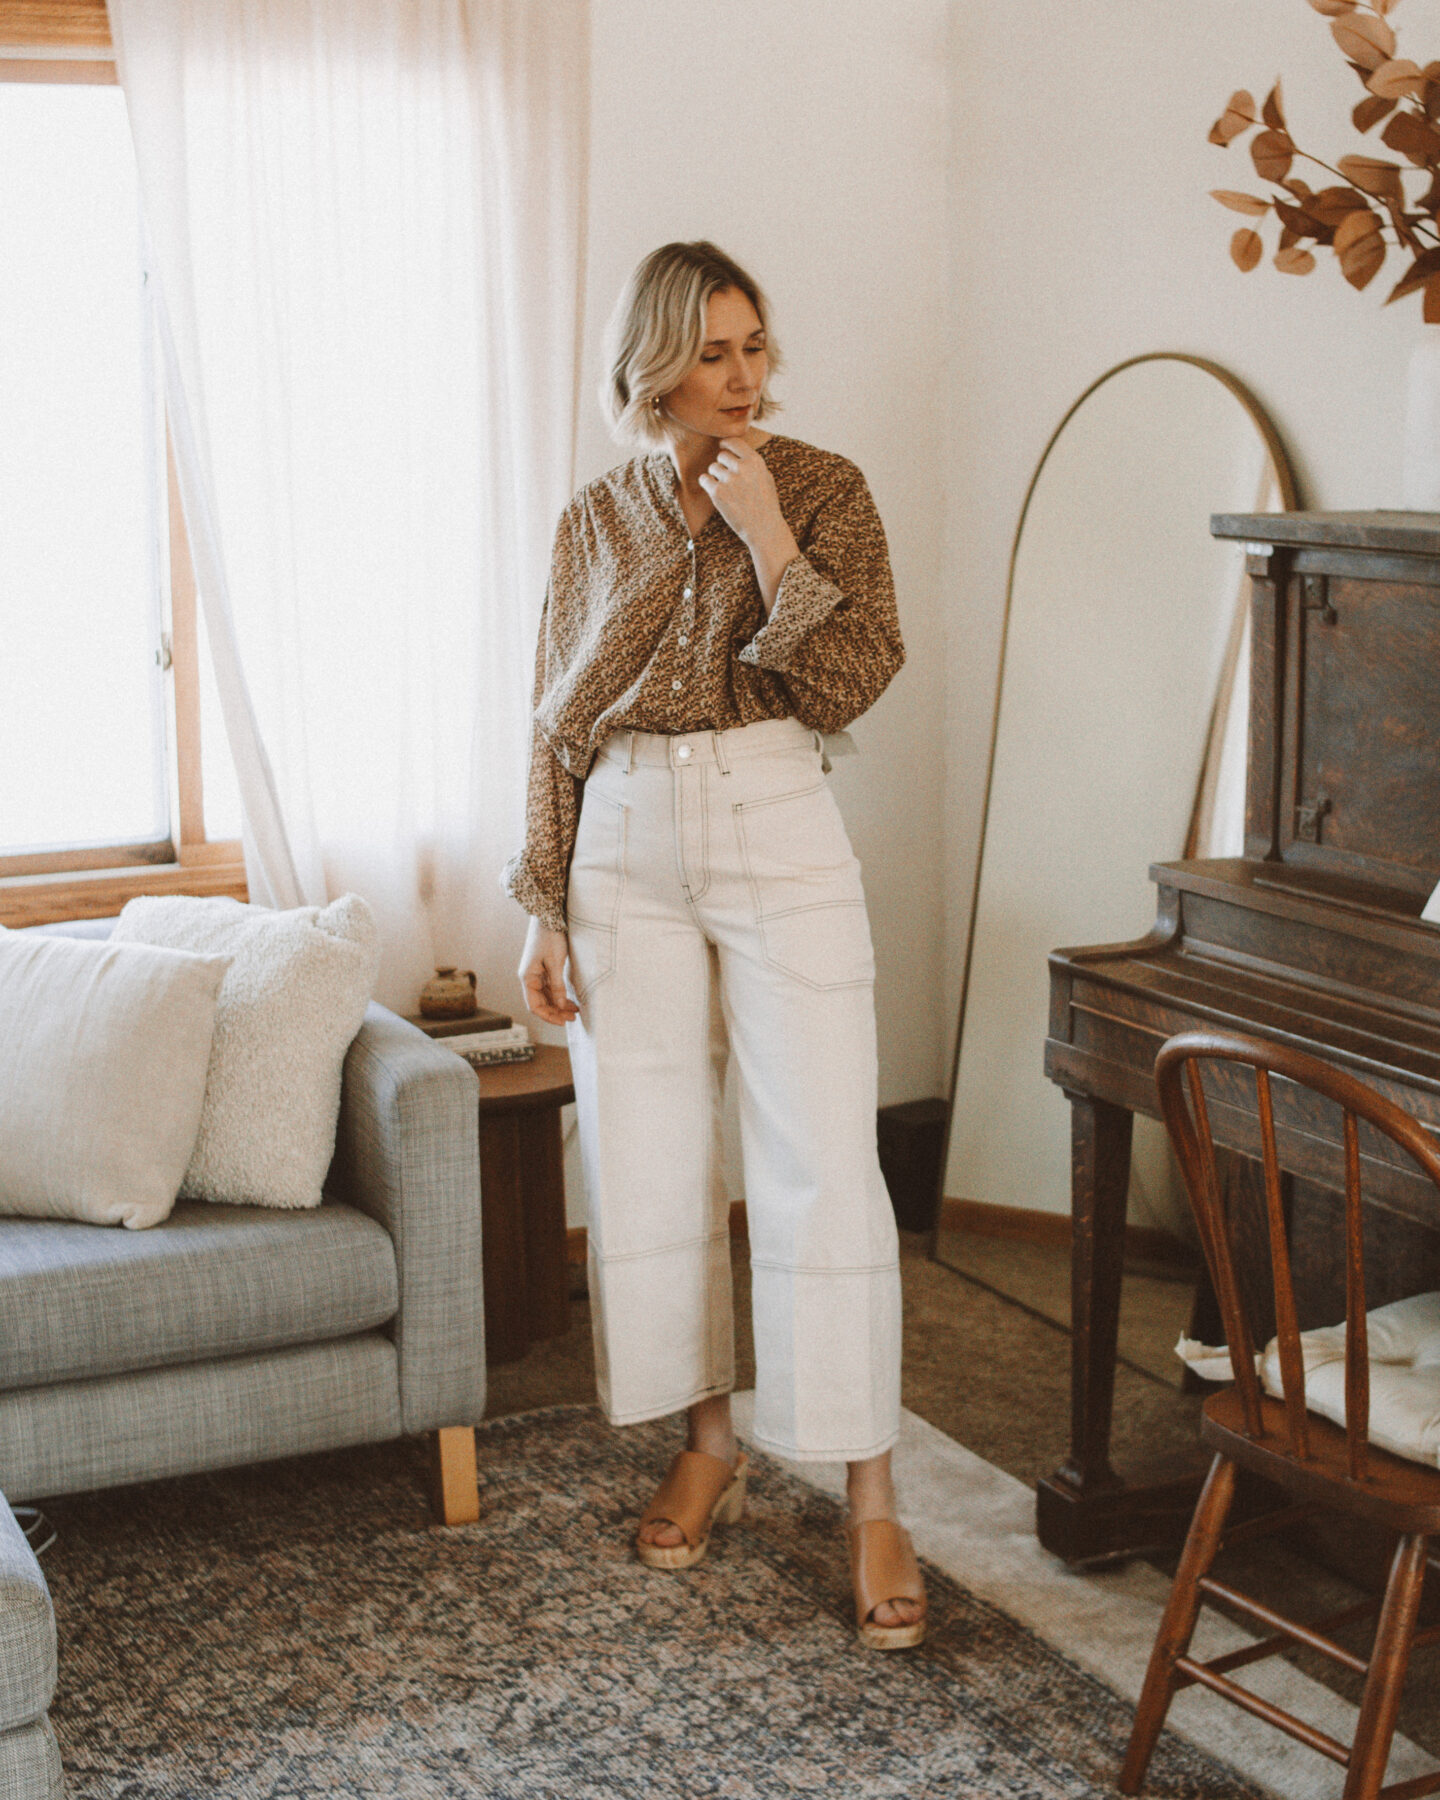 Karin Emily wears a pair of cargo jeans from Everlane and a floral blouse while standing in her living room